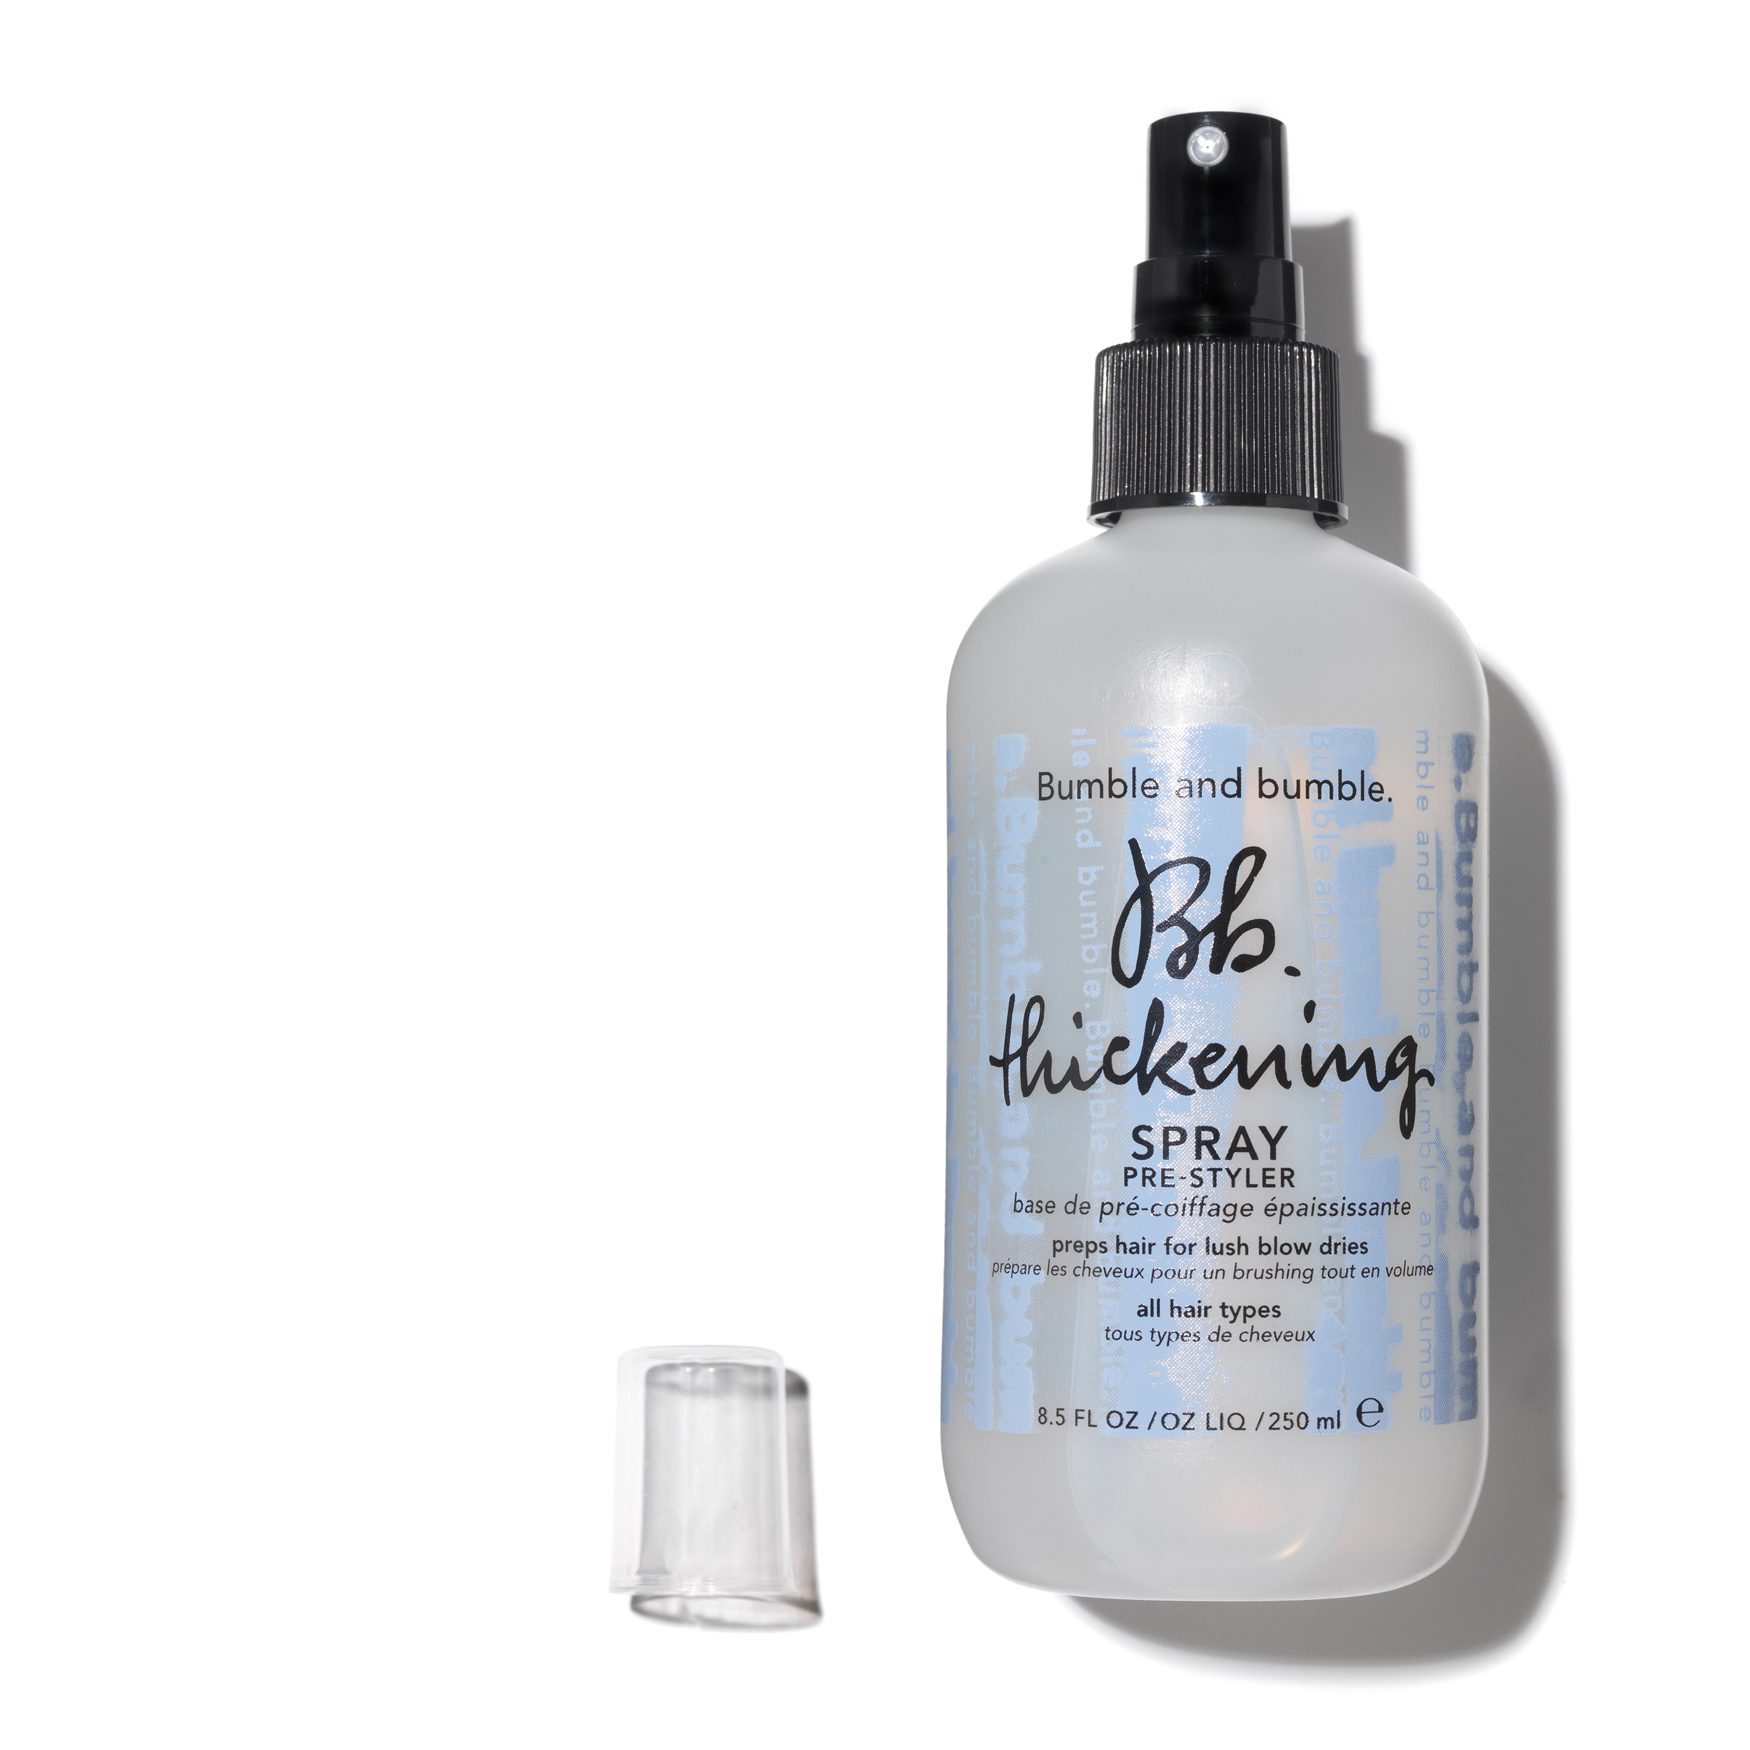 Bumble and Bumble Thickening Spray 250ml | Space NK